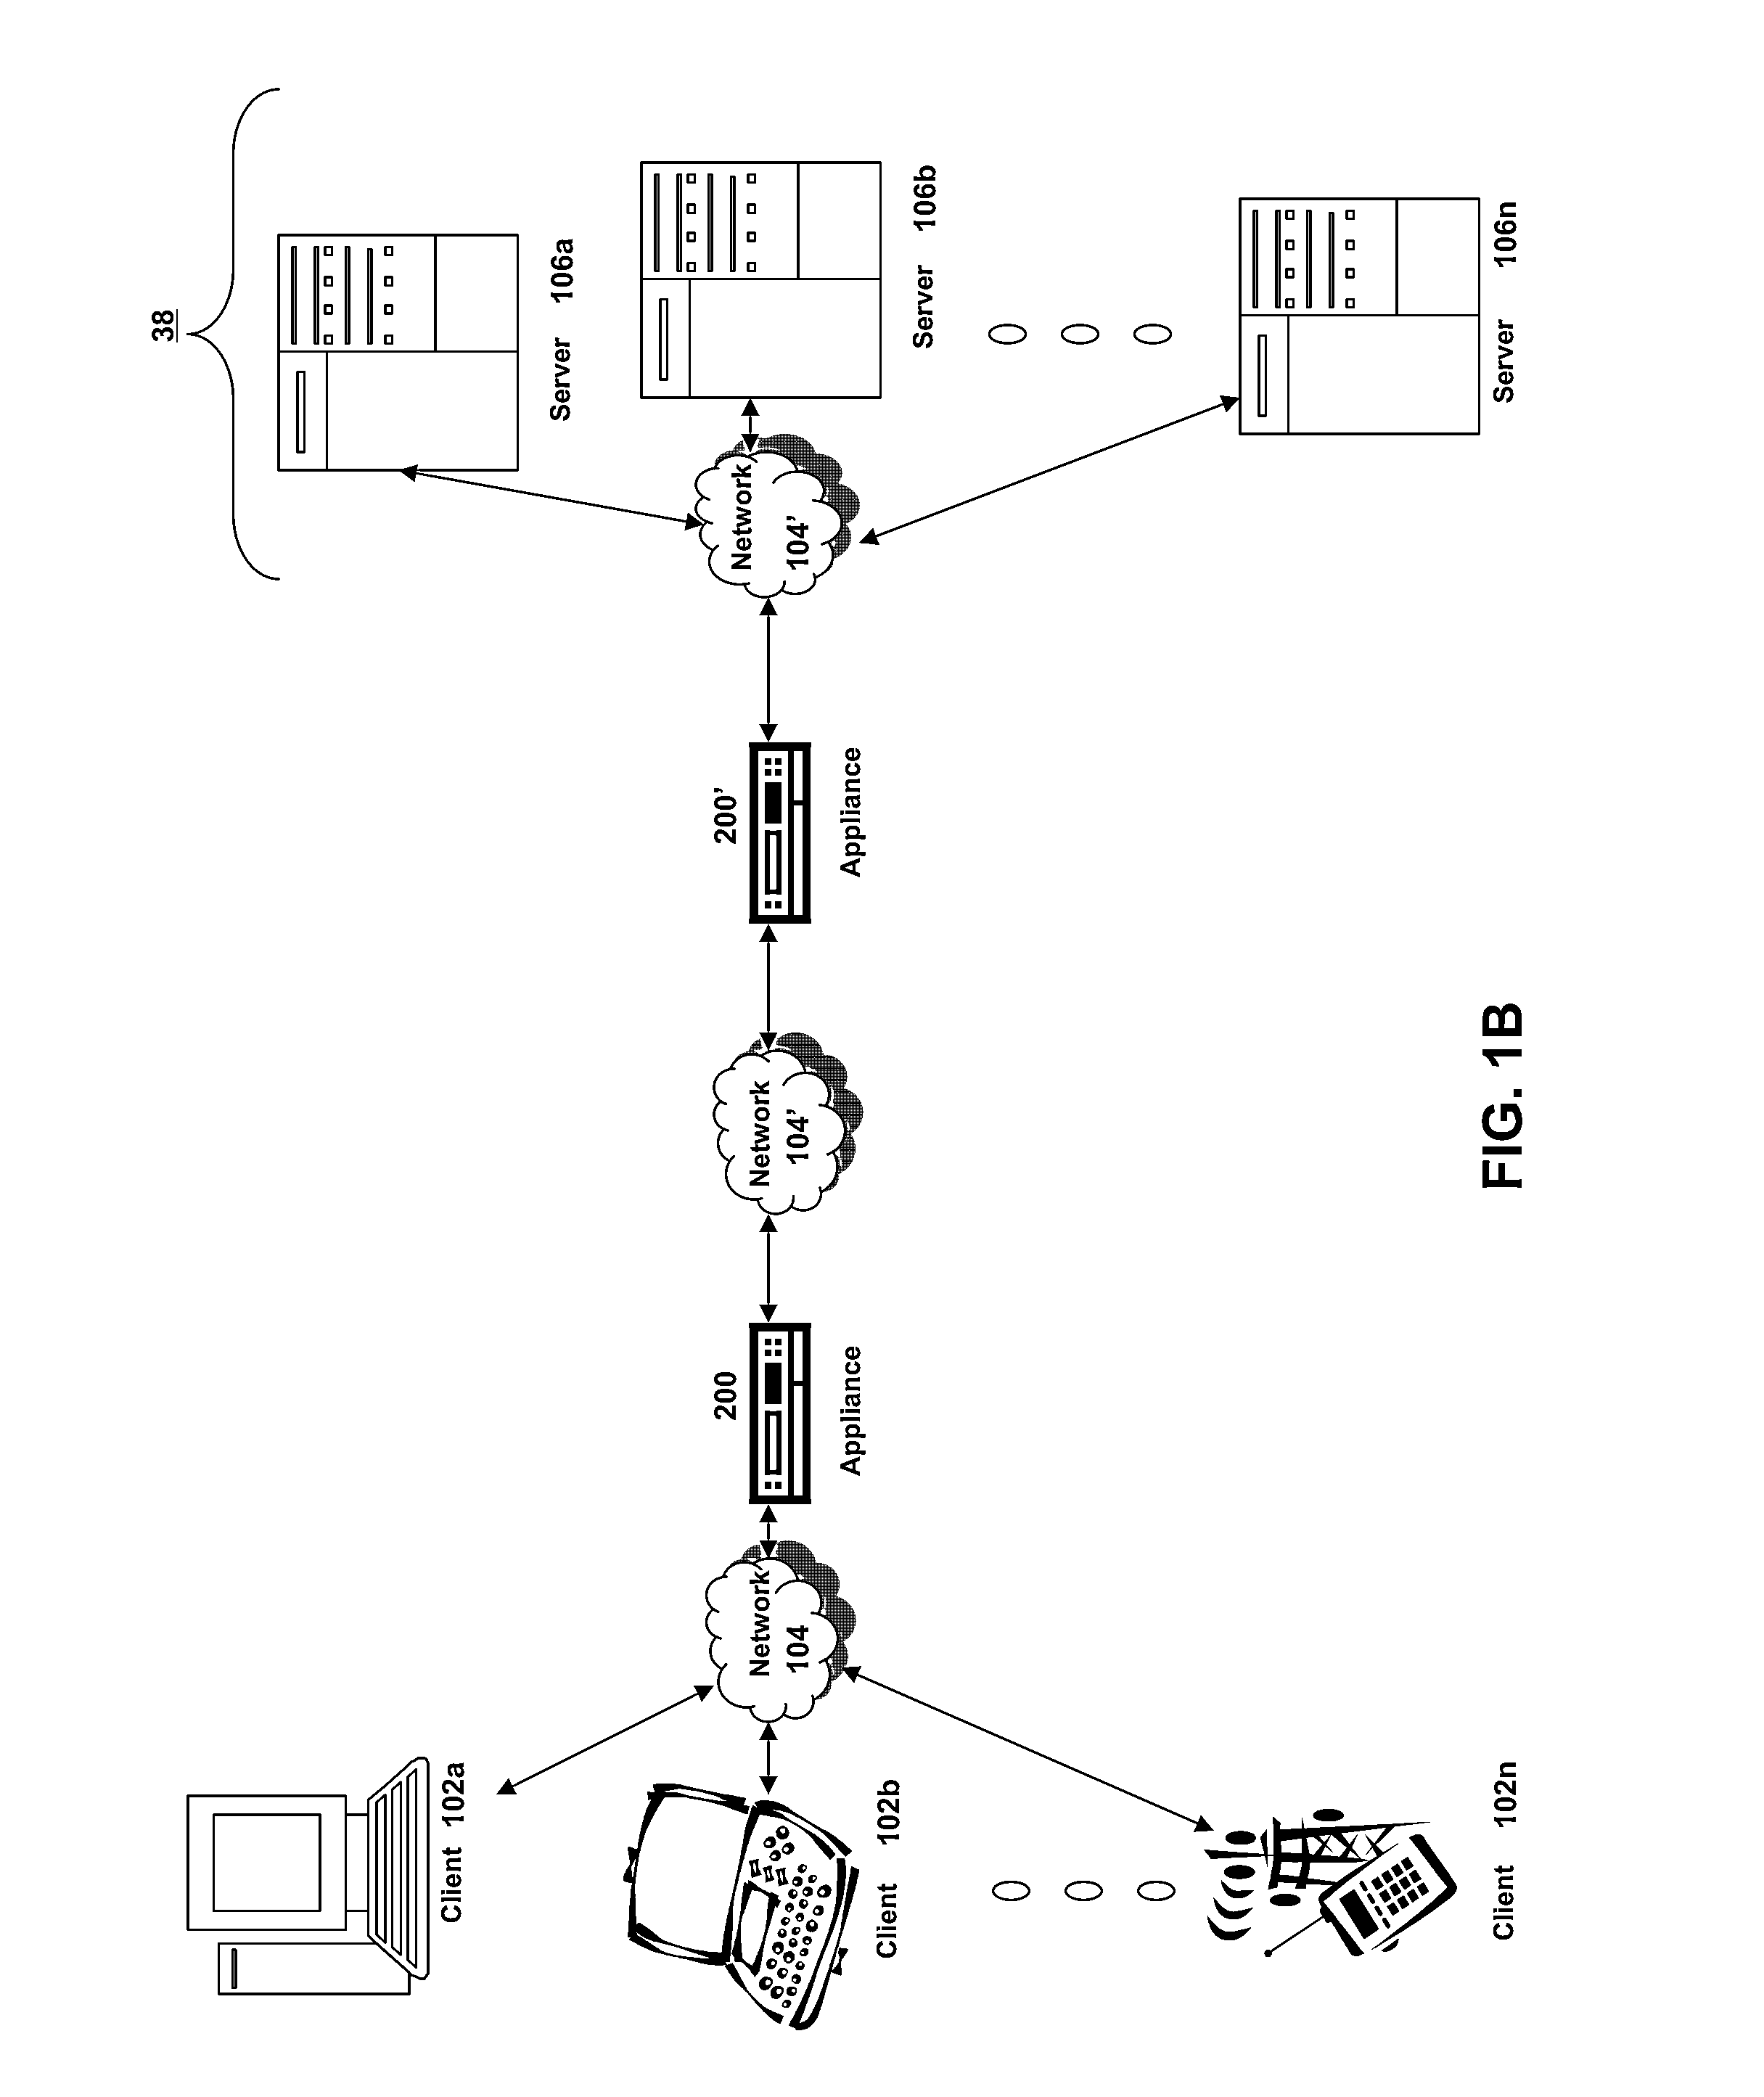 Systems and methods for caching snmp data in multi-core and cluster systems